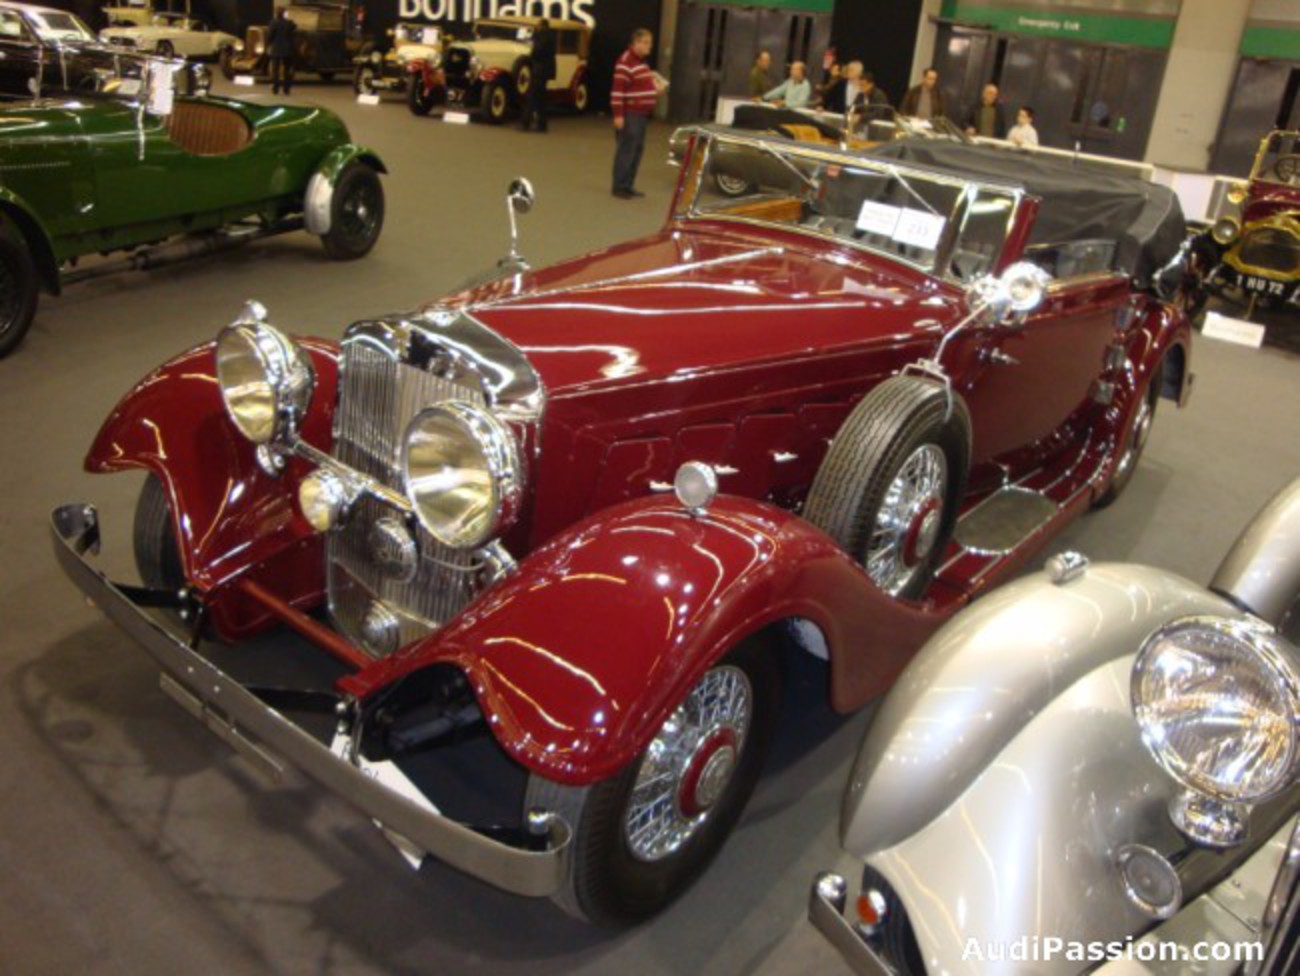 Horch 780b Photo Gallery: Photo #04 out of 11, Image Size - 650 x ...